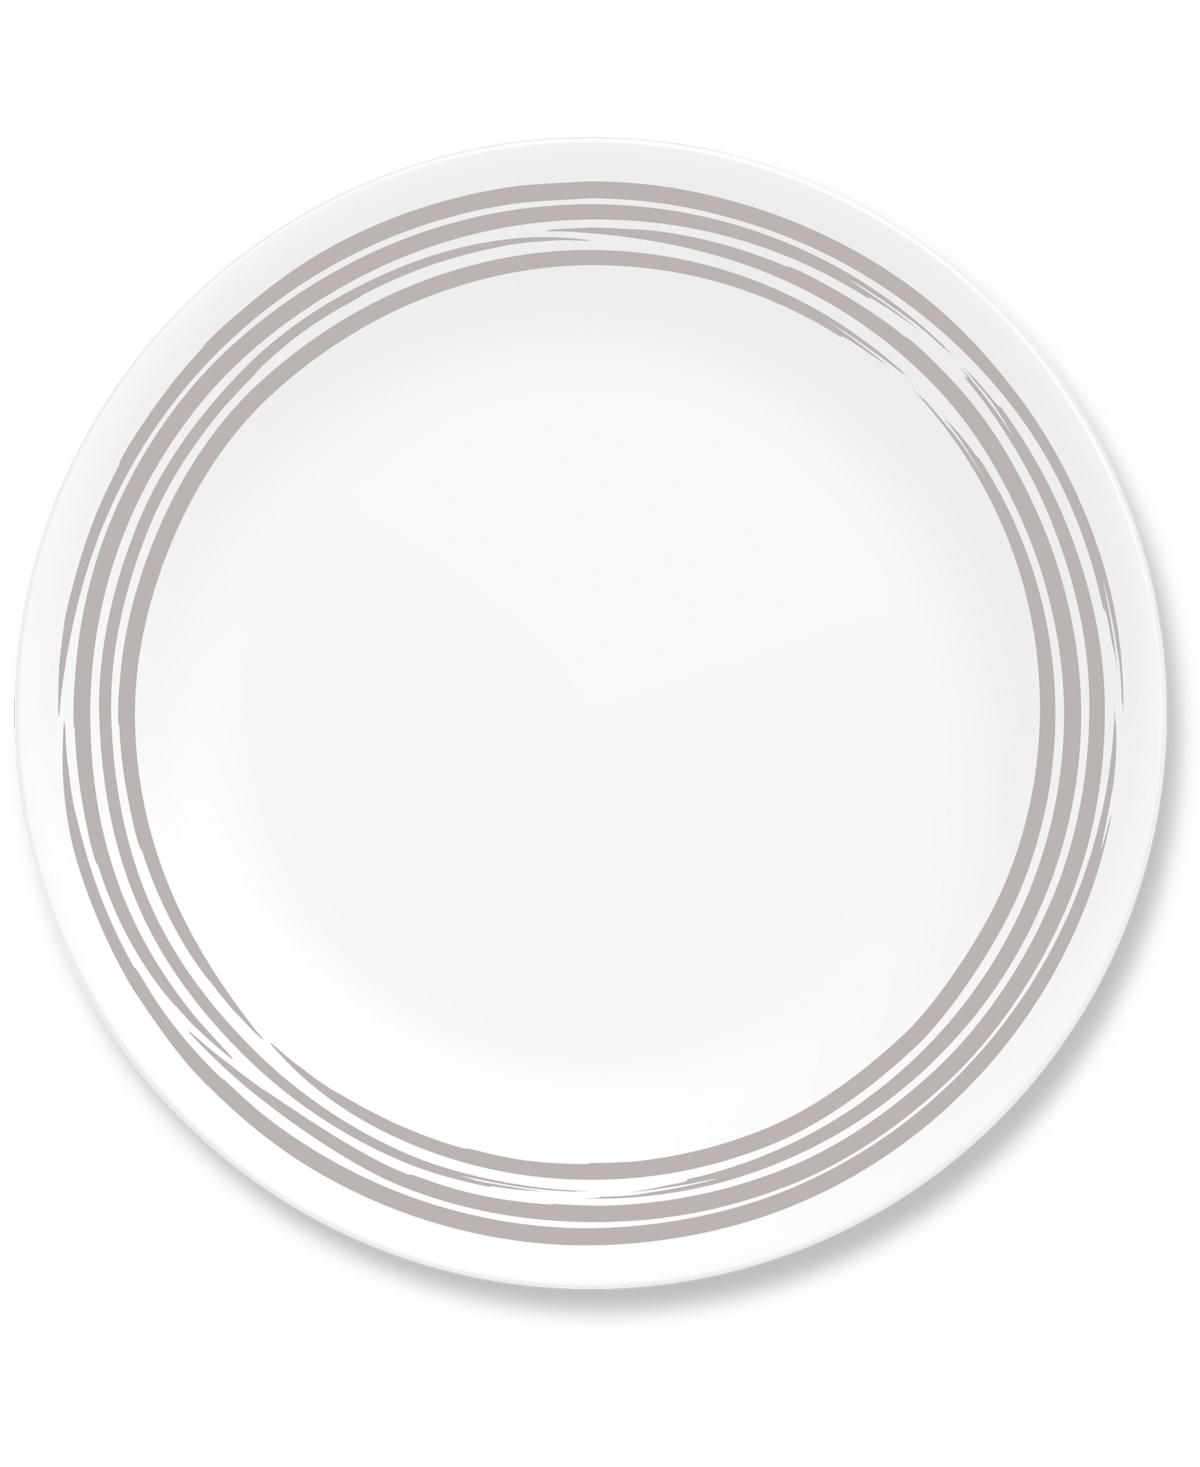 Brushed Silver-Tone Salad Plate - White, Silvery-Gray